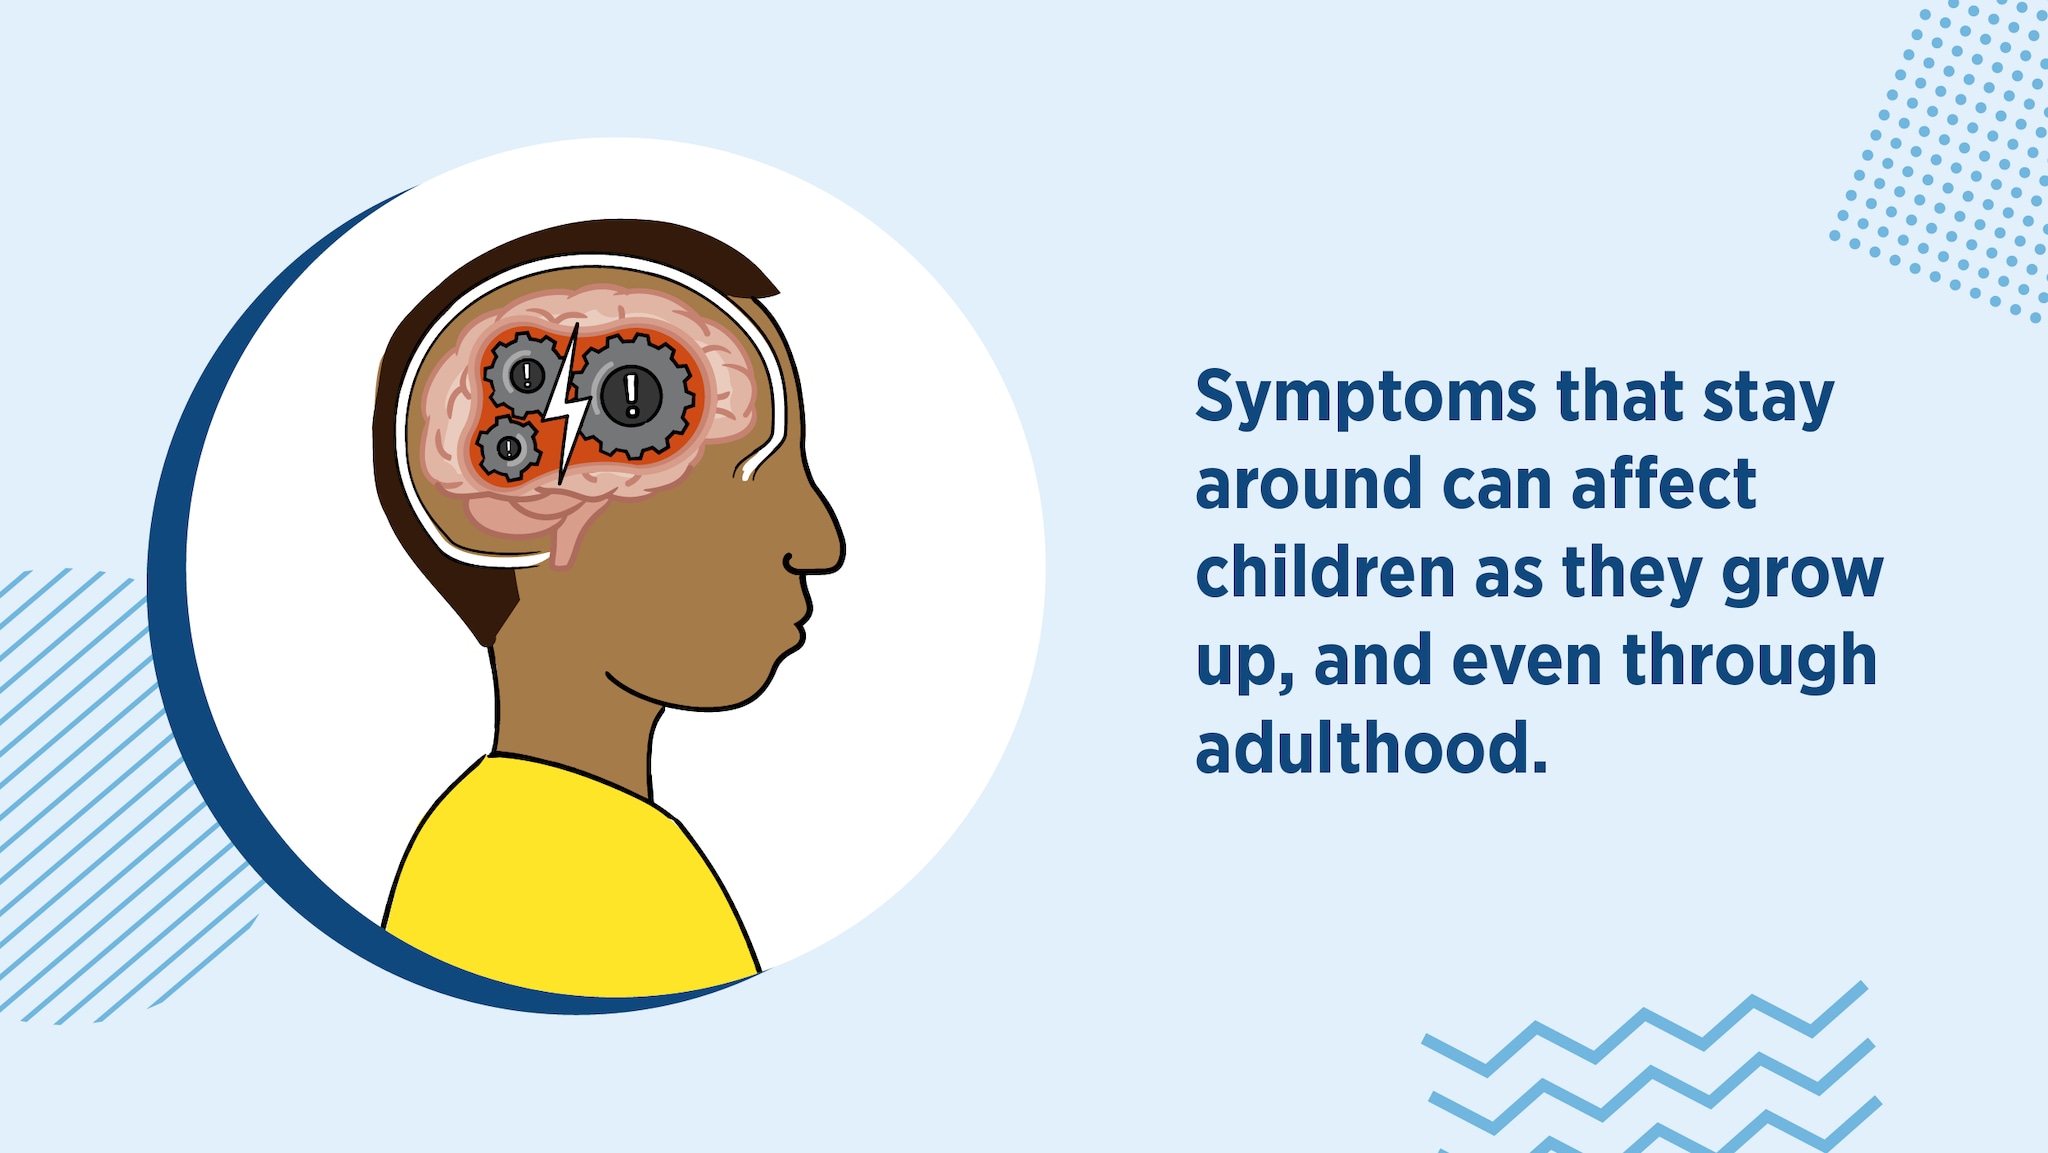 Symptoms that stay around can affect children as they grow up, and even through adulthood.